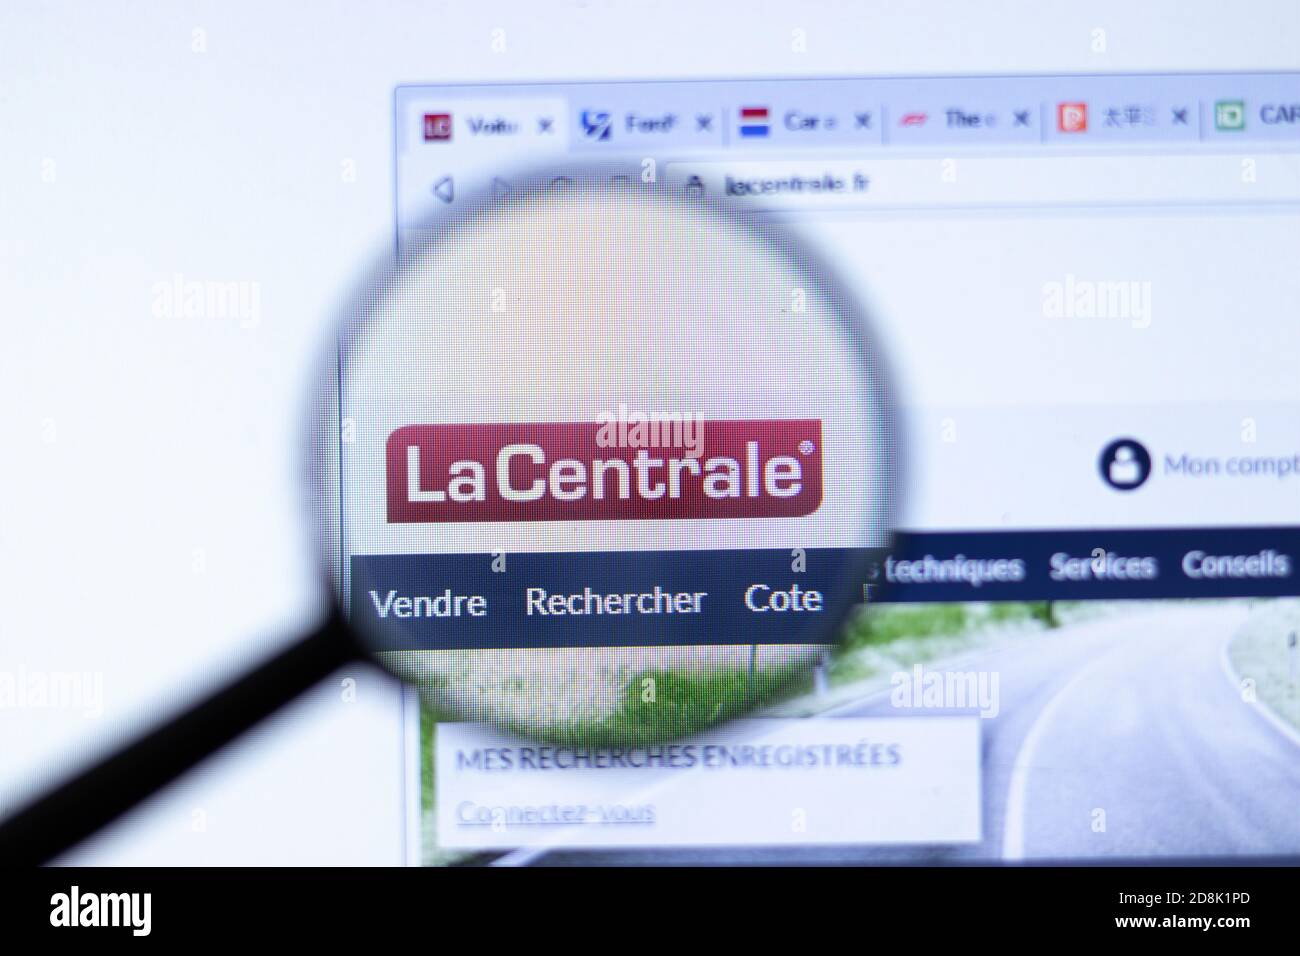 New York, USA - 29 September 2020: La Centrale lacentrale.fr company  website with logo close up, Illustrative Editorial Stock Photo - Alamy